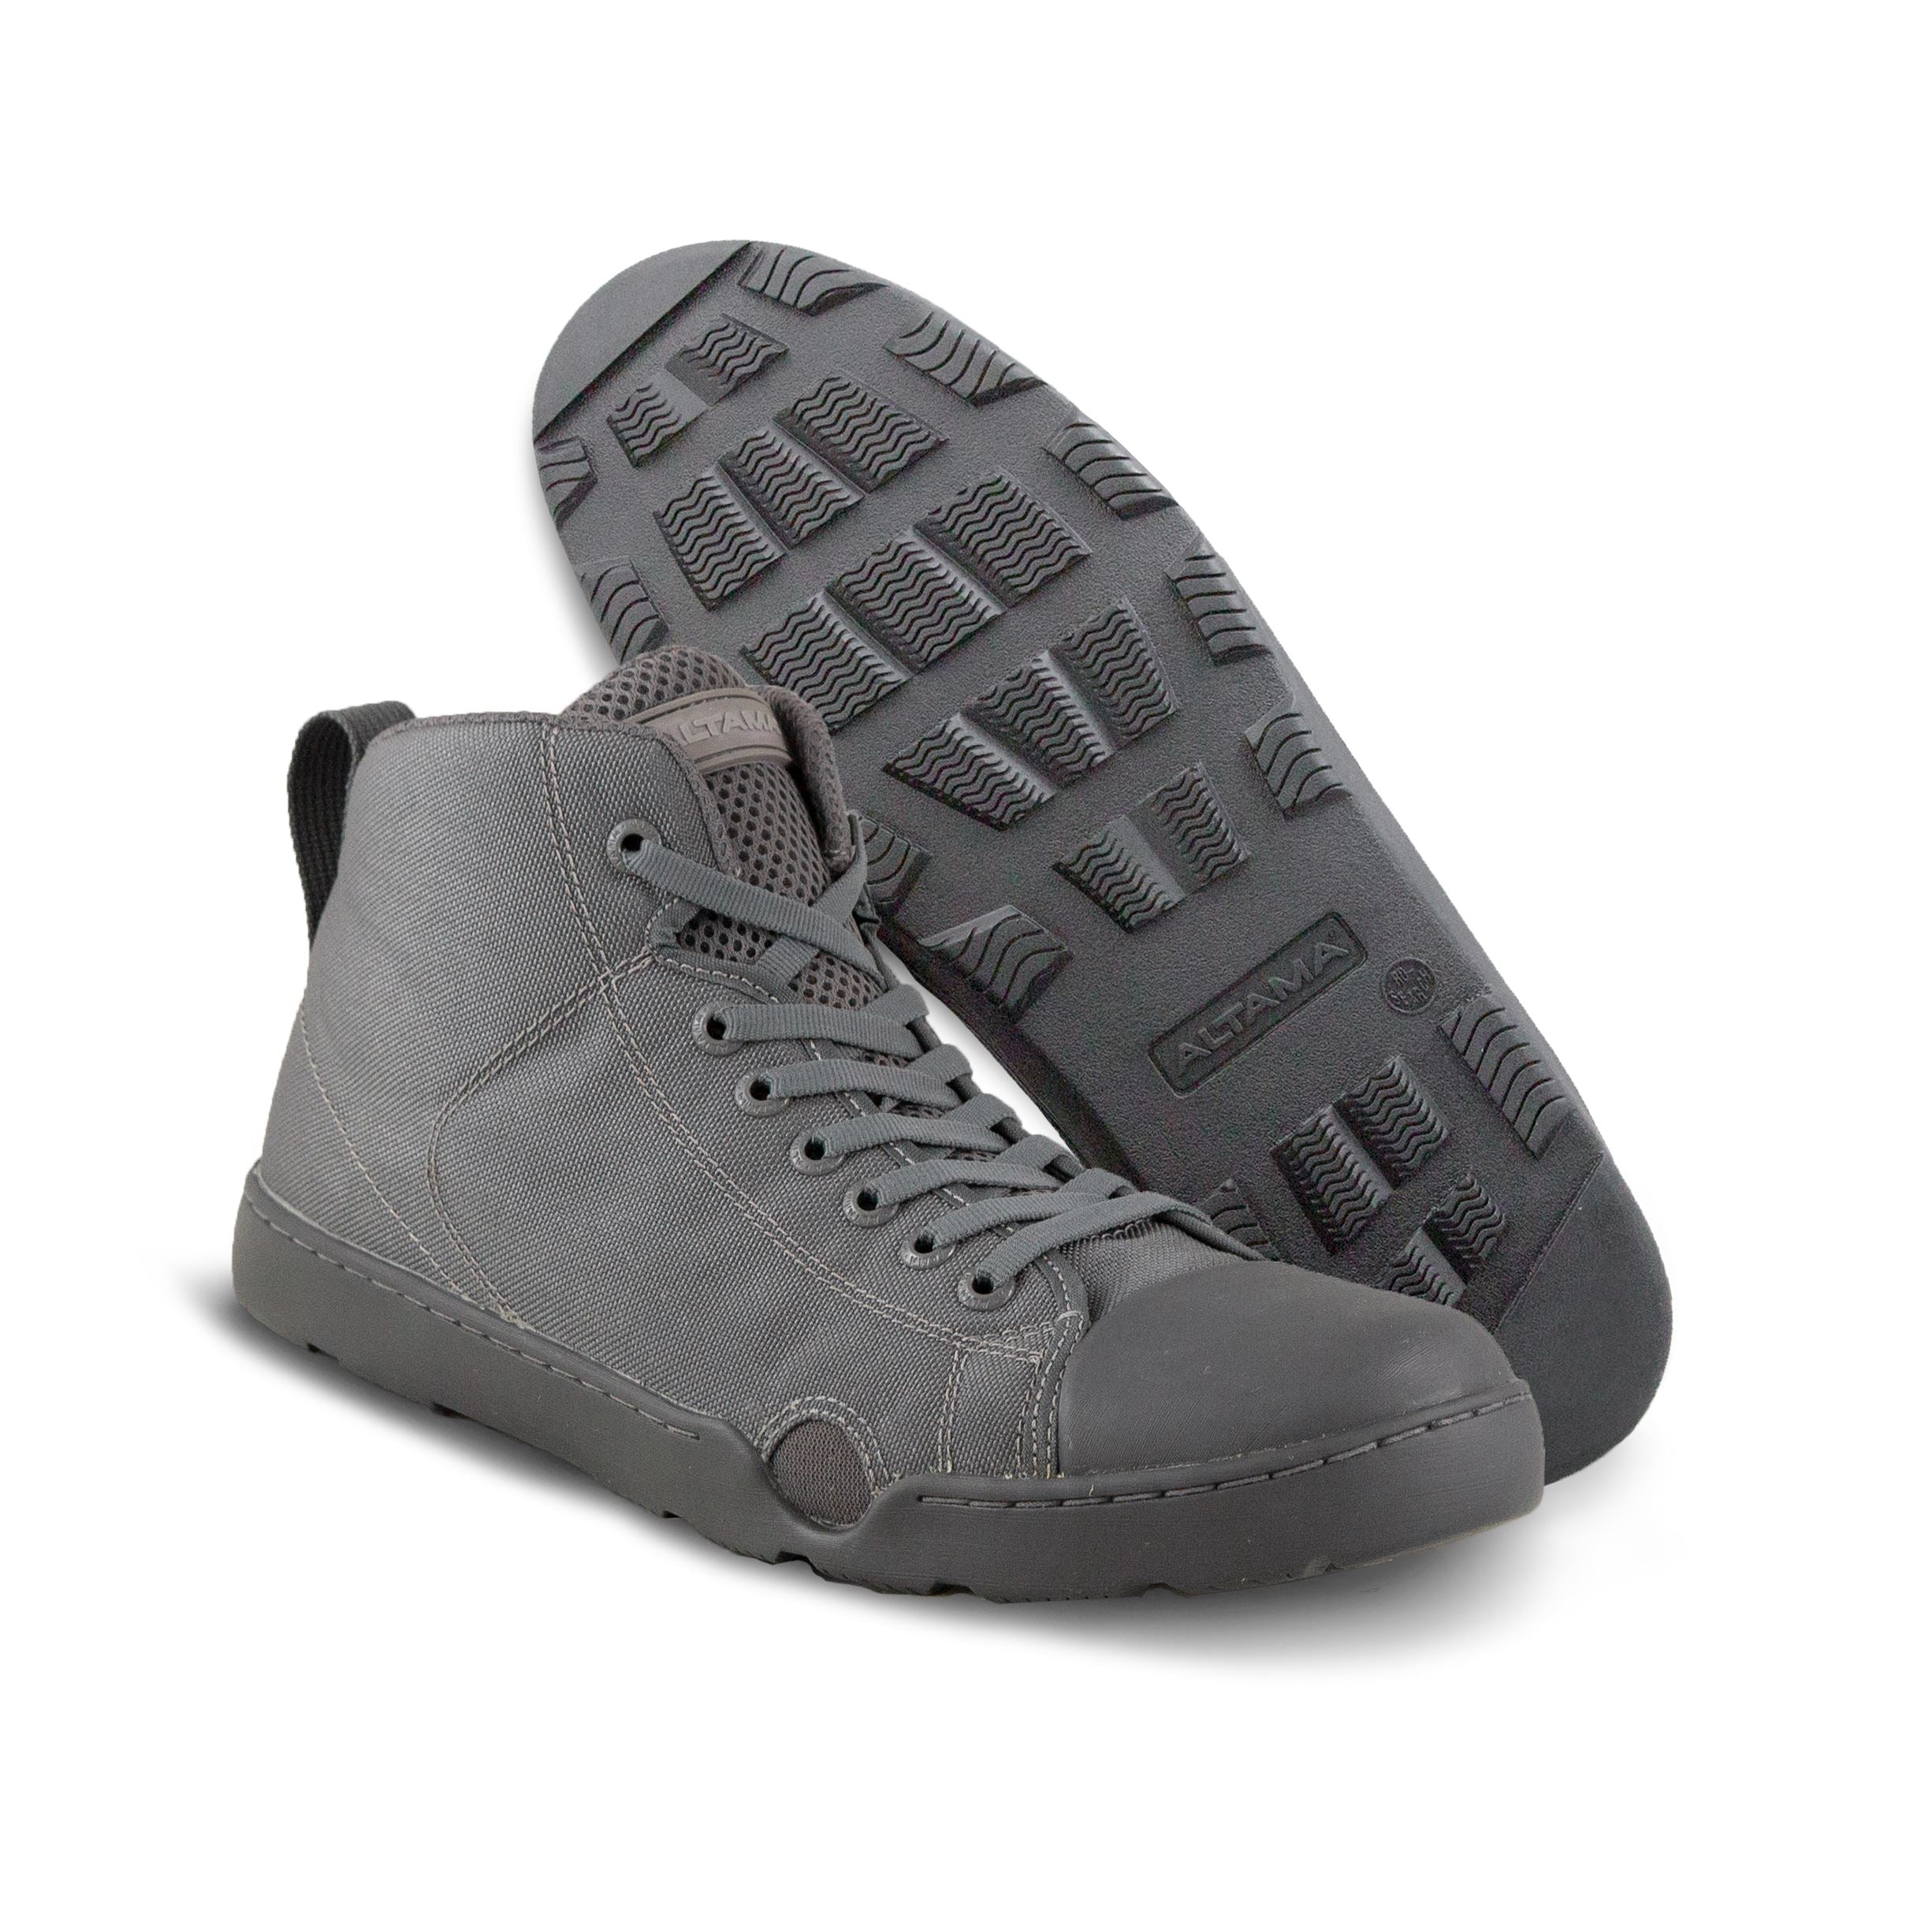 Altama OTB Maritime Assault Mid Shoes GREY Wide Sizes Available Footwear Altama Grey 8 